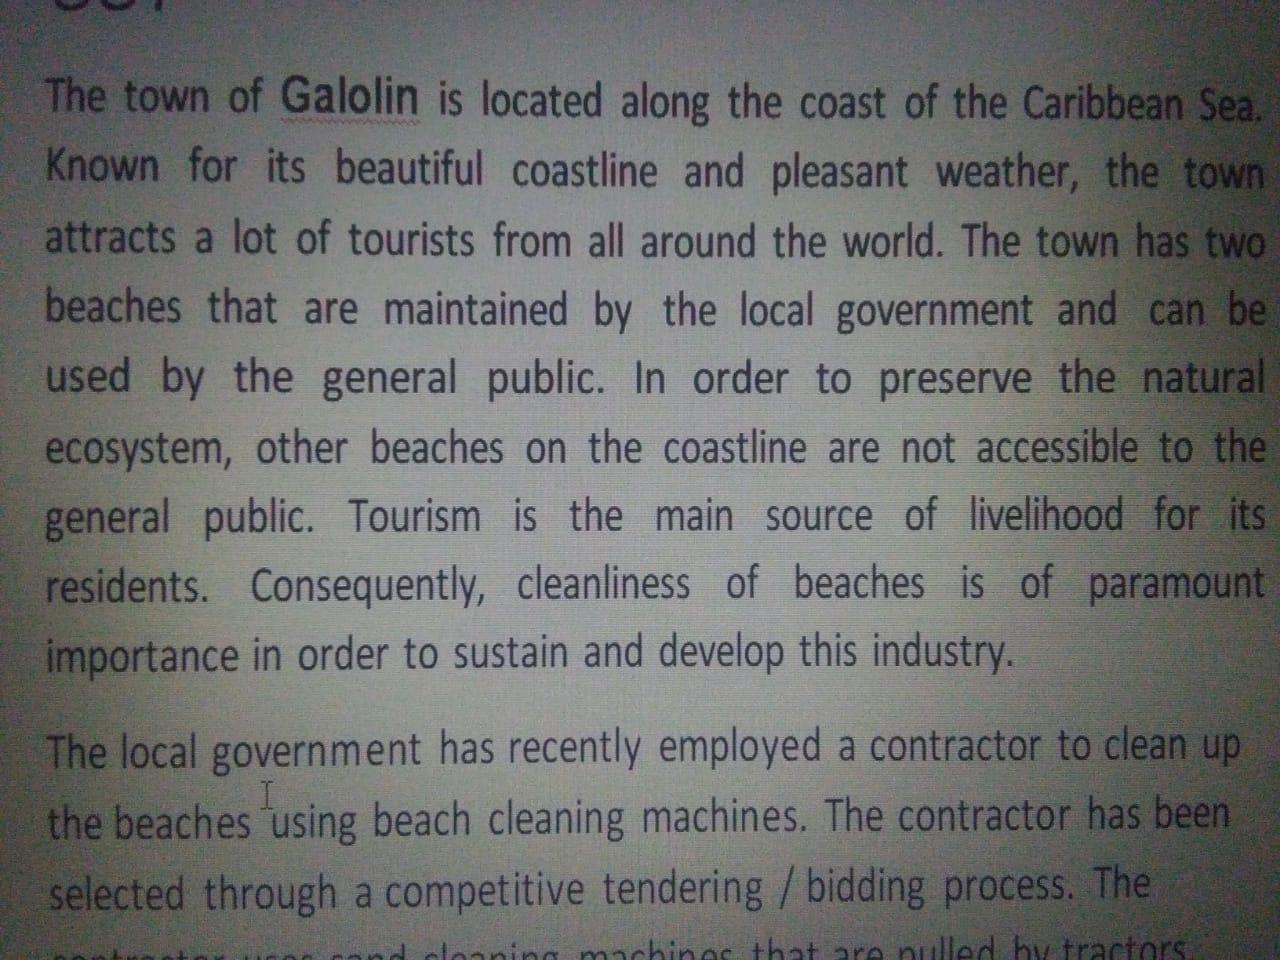 The town of Galolin is located along the coast of the Caribbean Sea. Known for its beautiful coastline and pleasant weather,